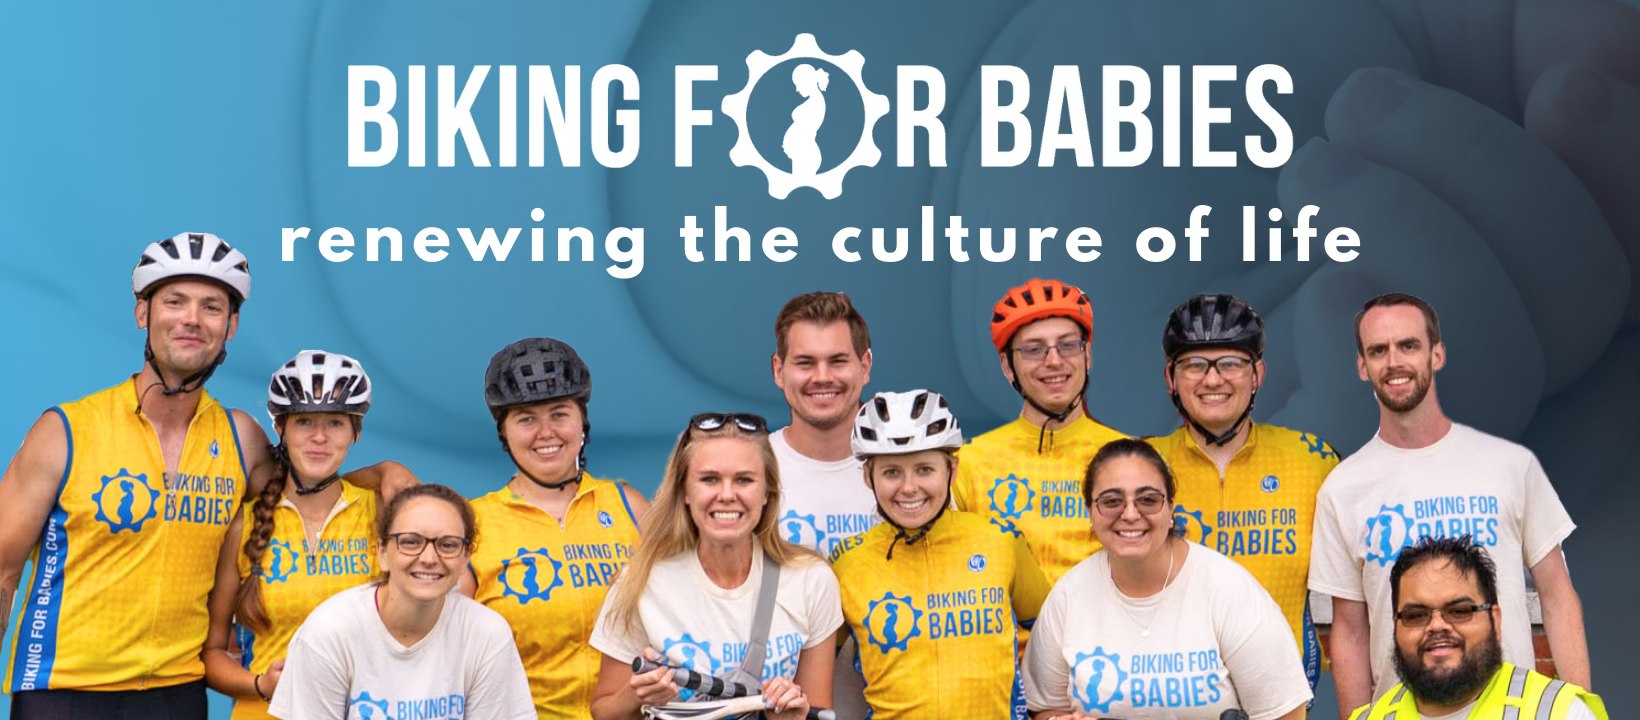 Biking for Babies, renewing the culture of life